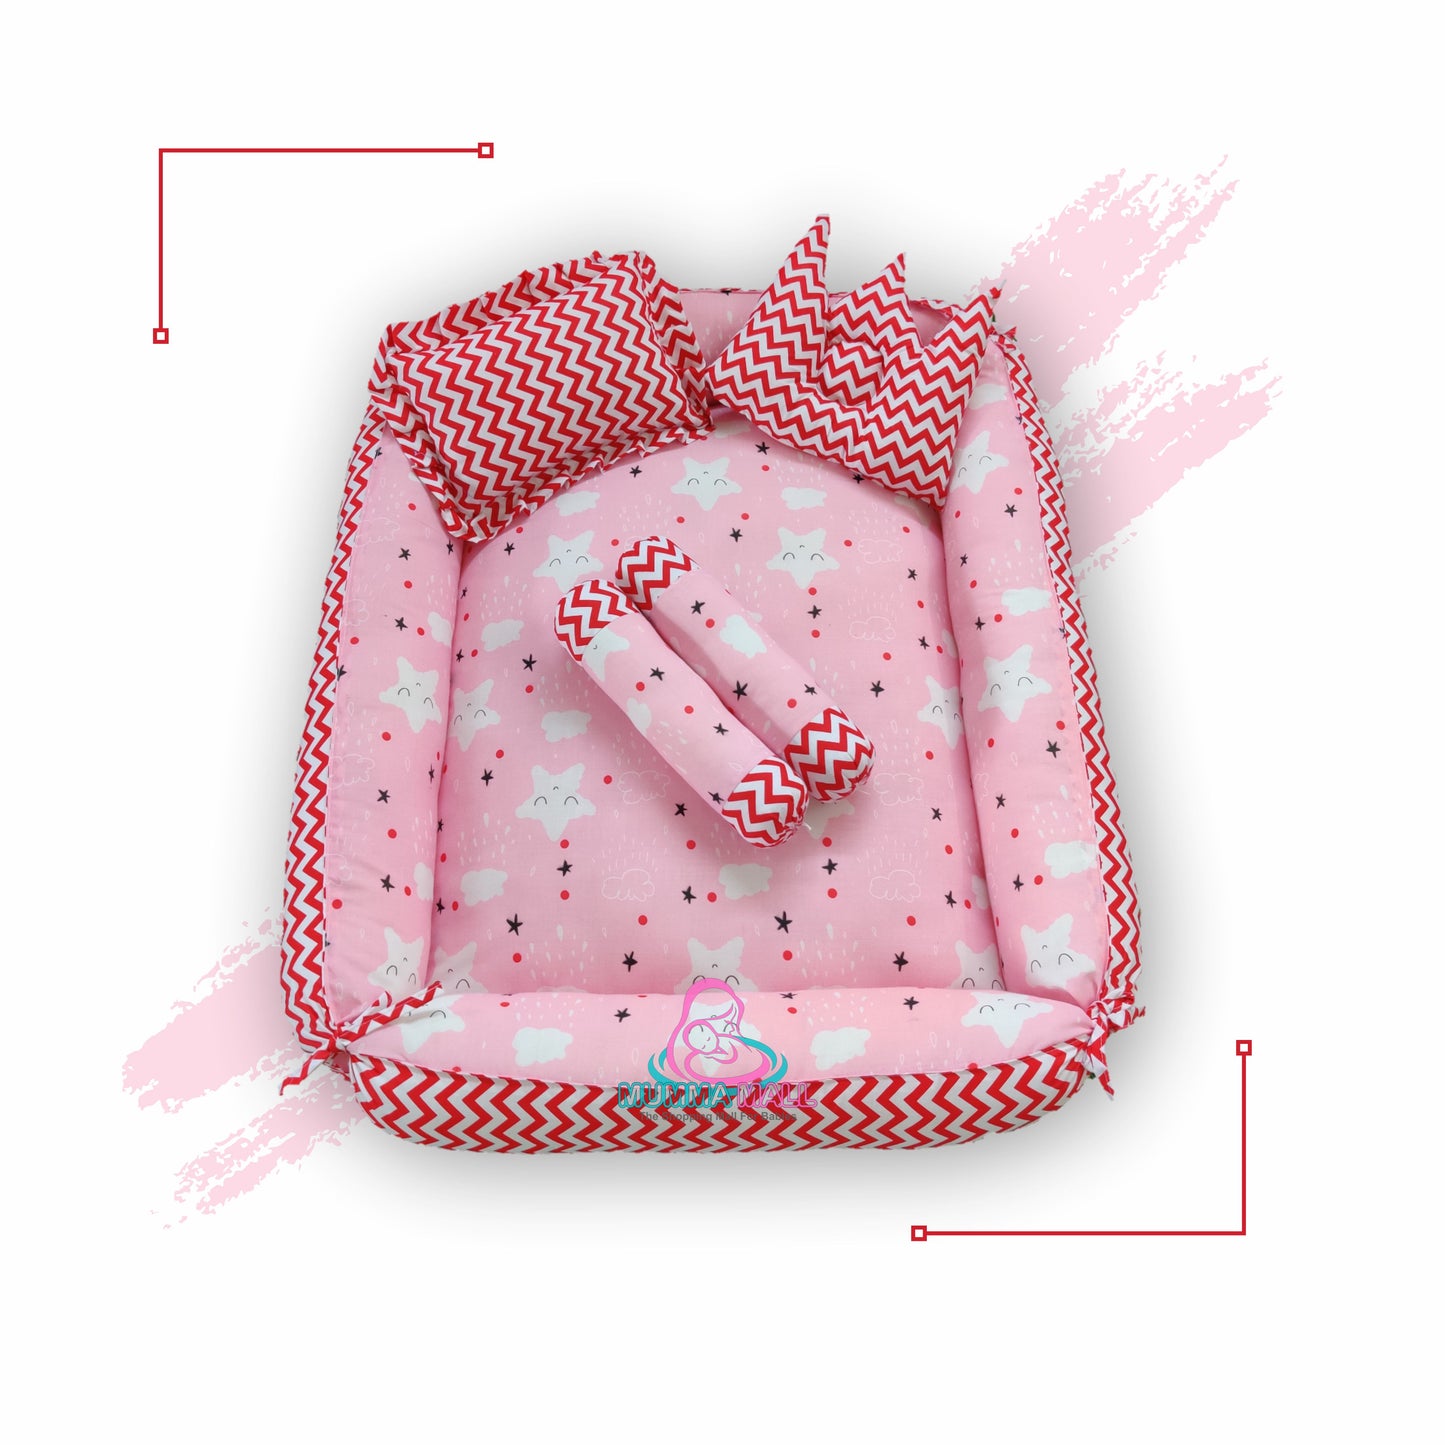 Baby box mattress set with set of 4 pillows as neck support, side support and toy (Pink and Red)